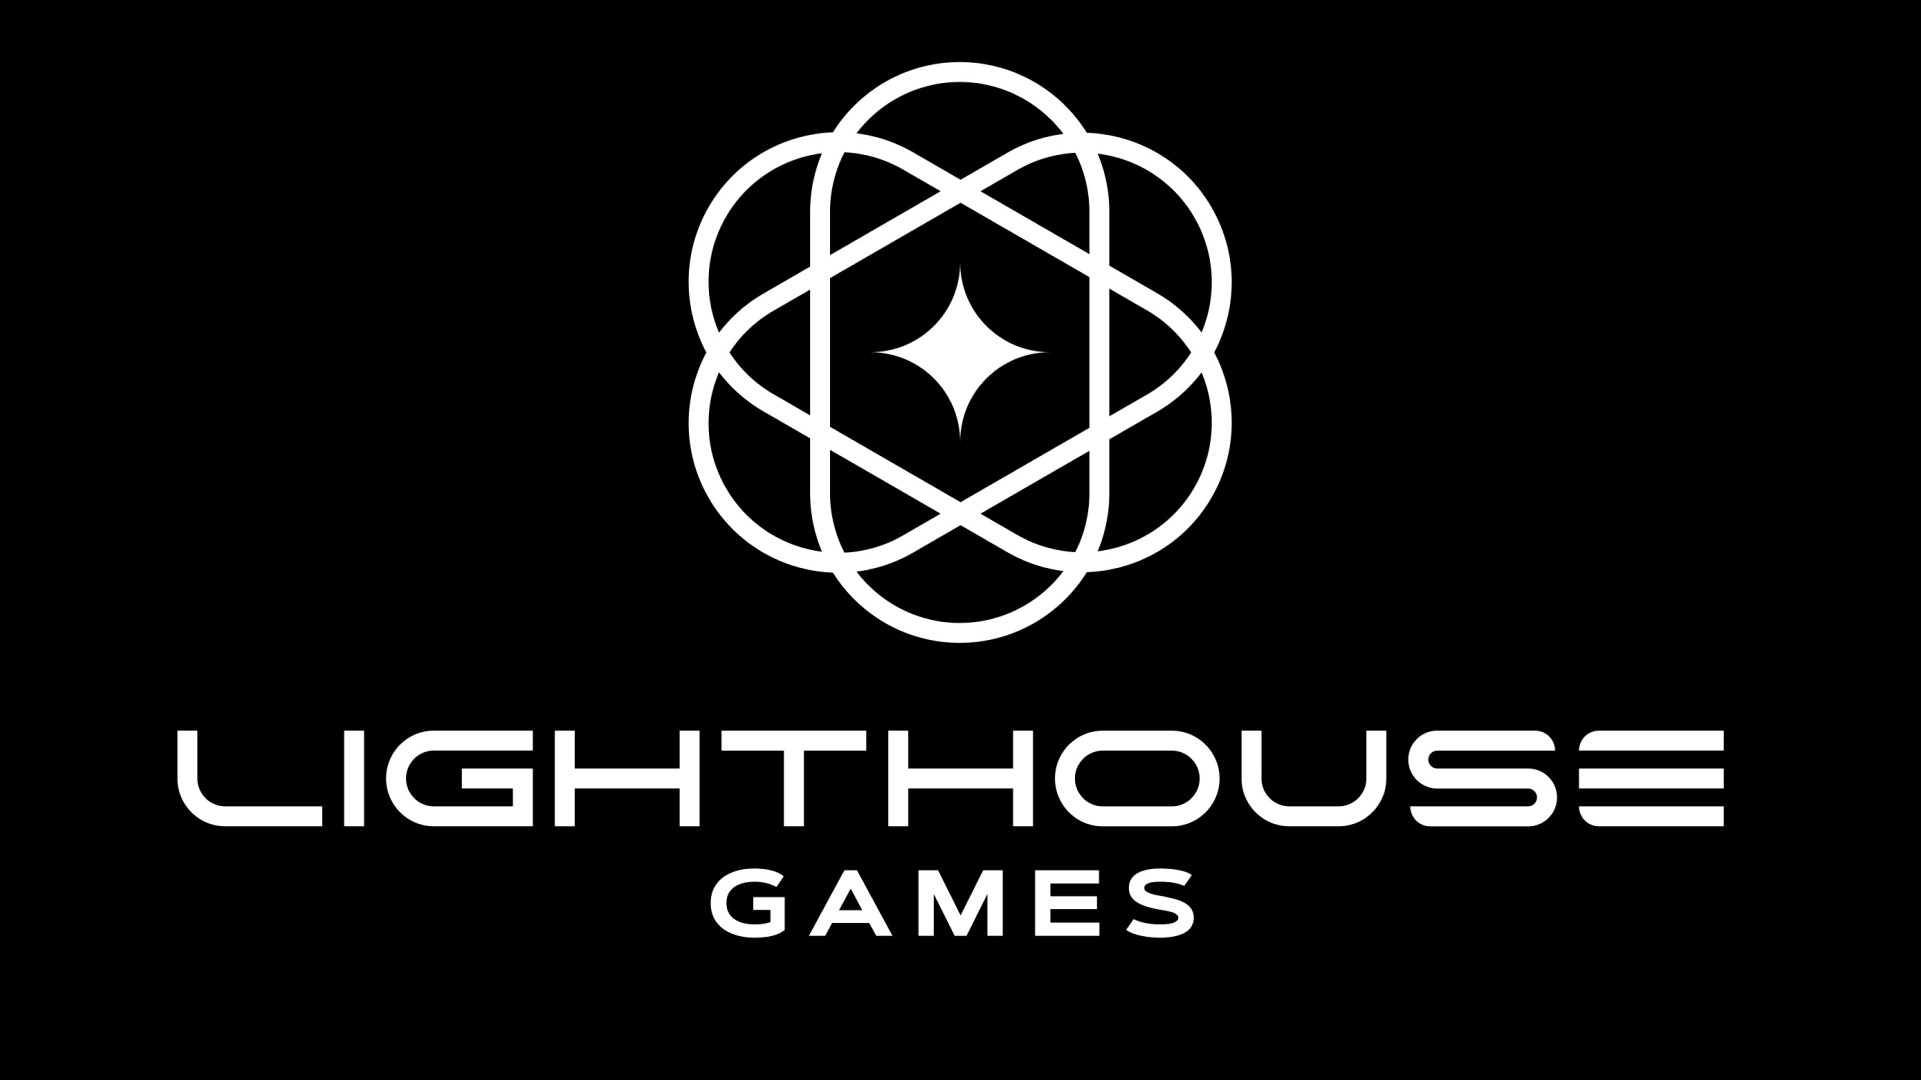 Ex-Playground Games Head’s Studio Lighthouse Games Receives Investment from Tencent